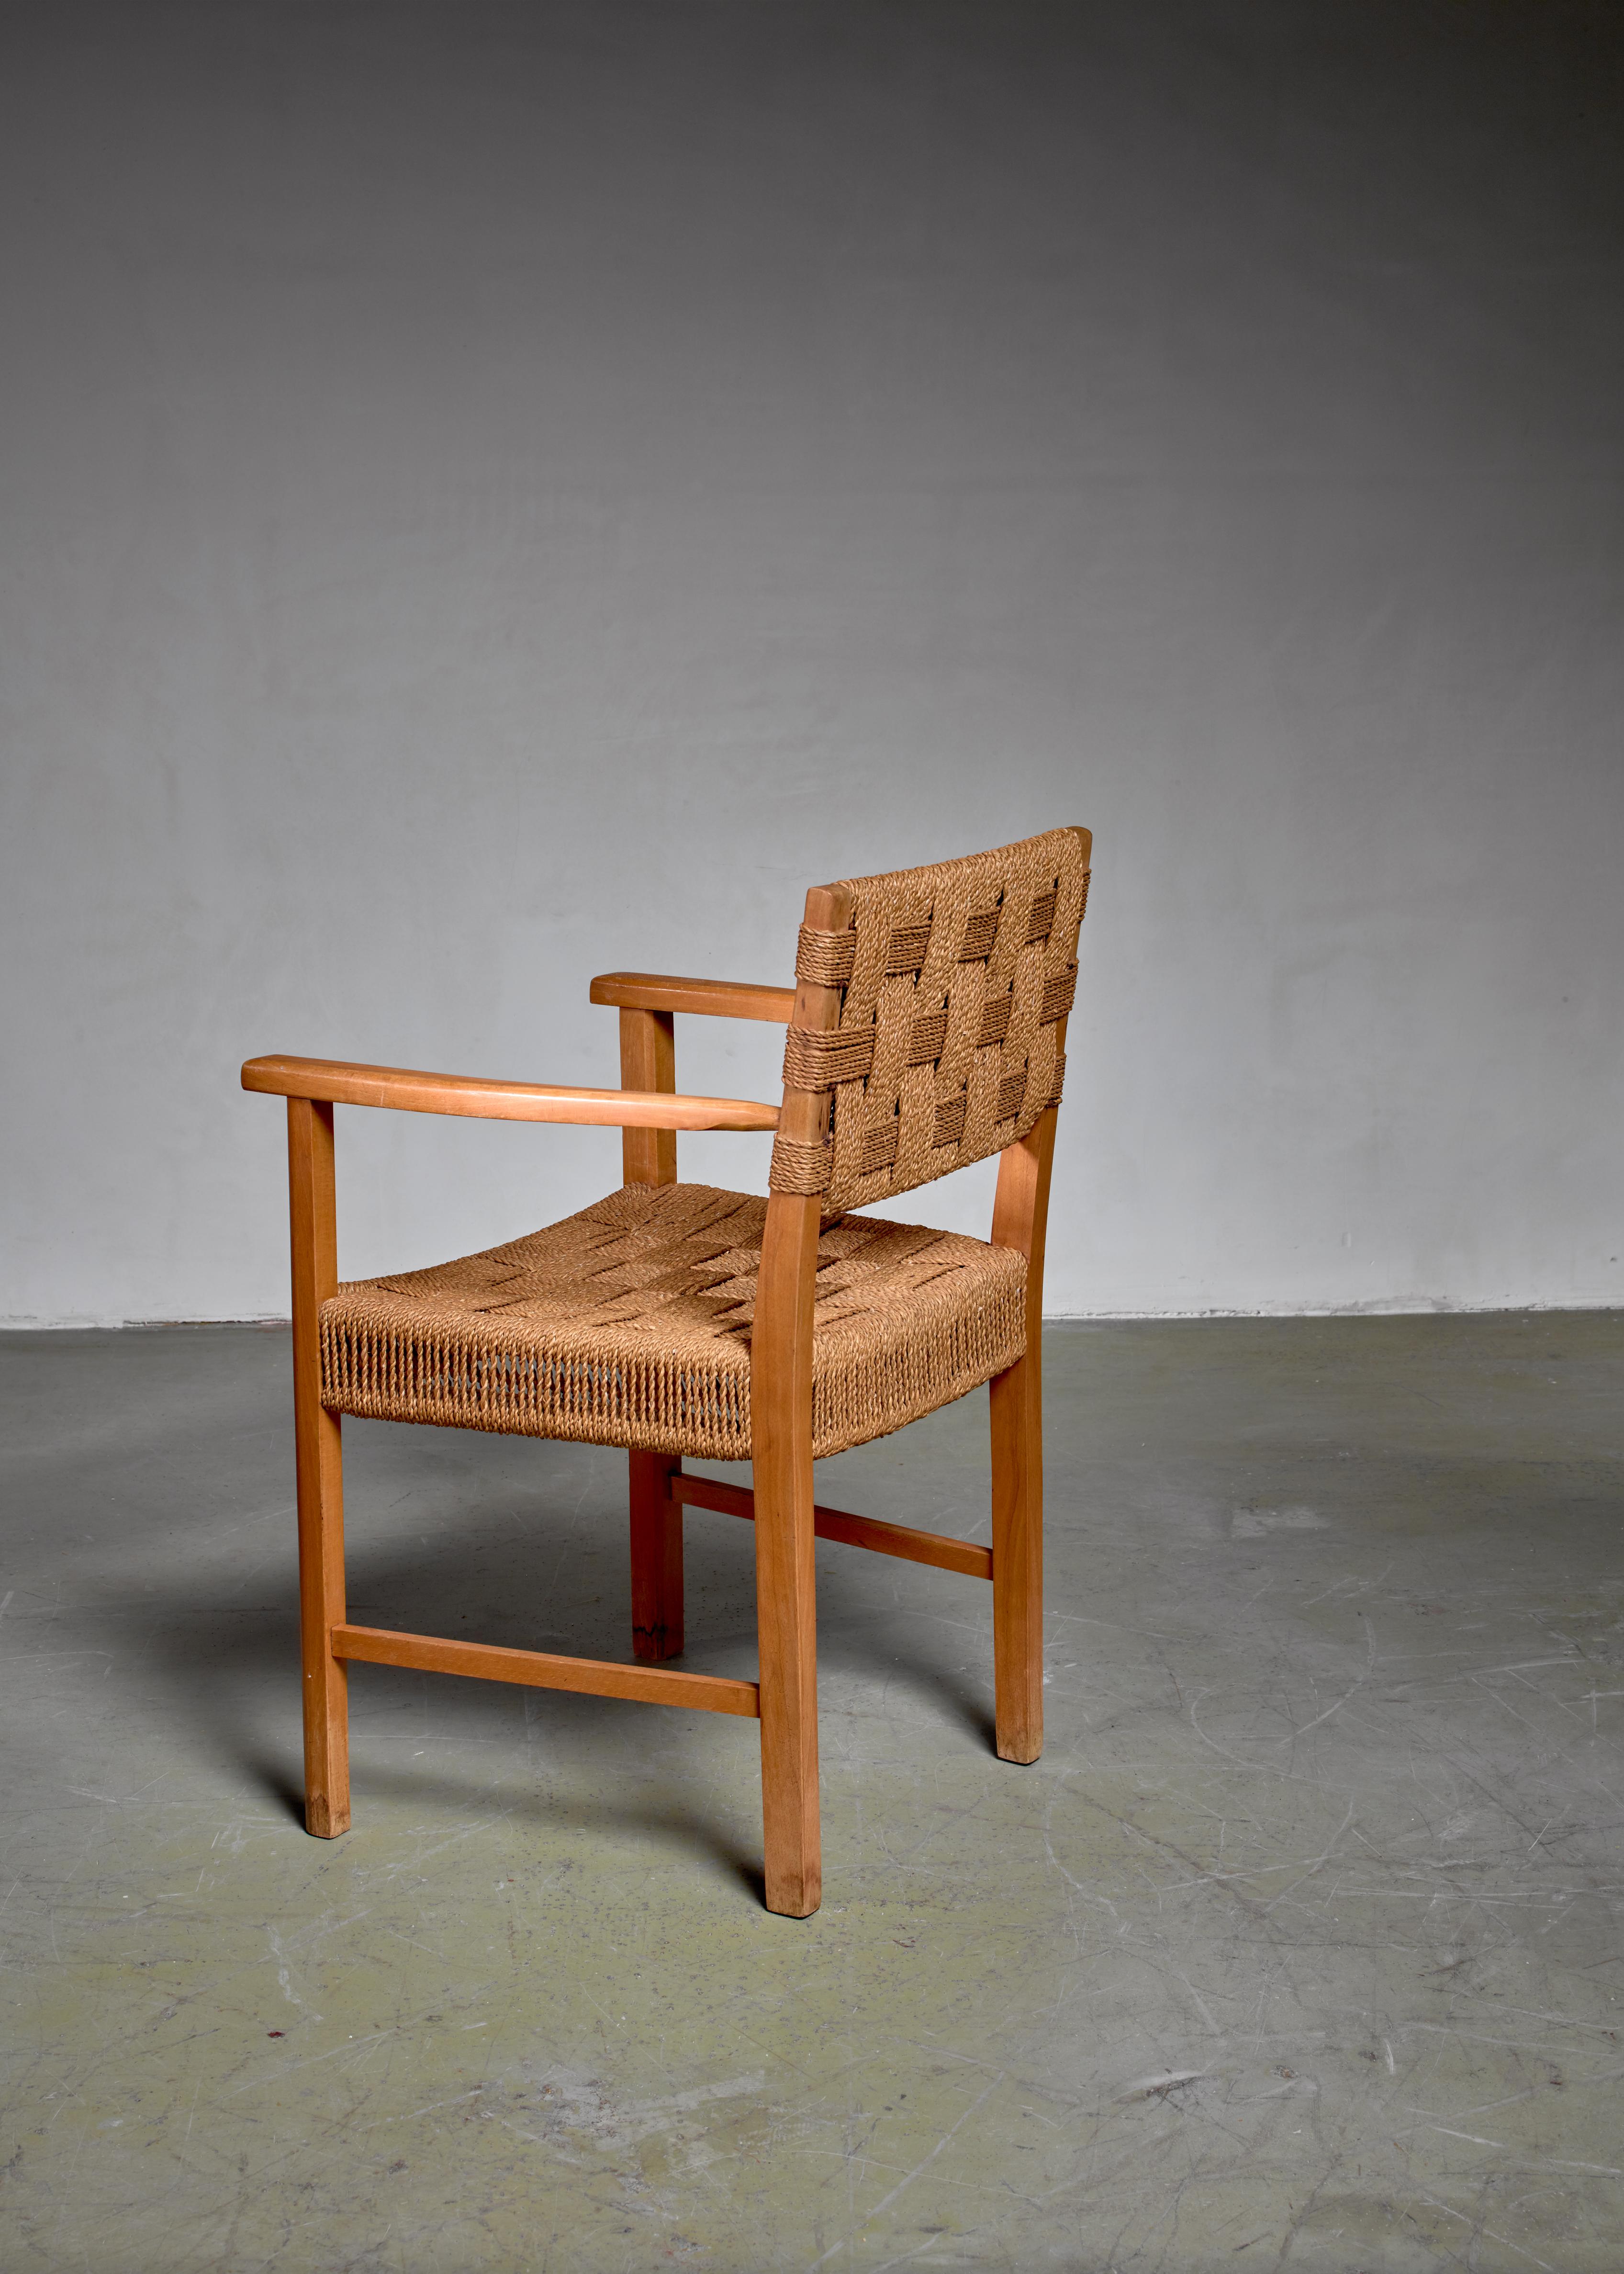 A Danish armchair made of a beech frame with a woven seagrass seating and backrest. The chair and especially the seagrass seating show a strong resemblance to the work of Frits Schlegel.